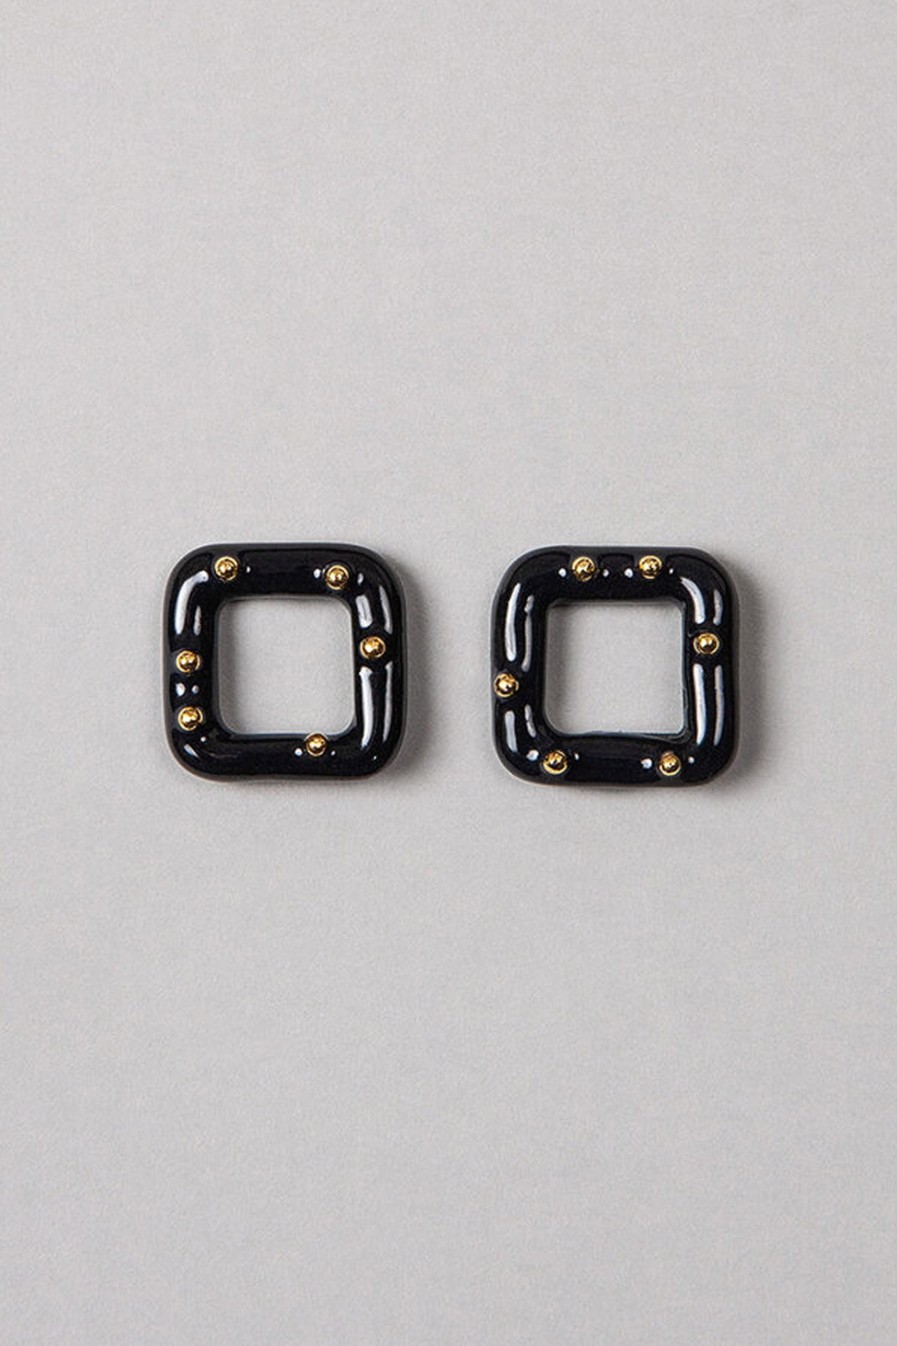 ABE Earrings square black / gold accents